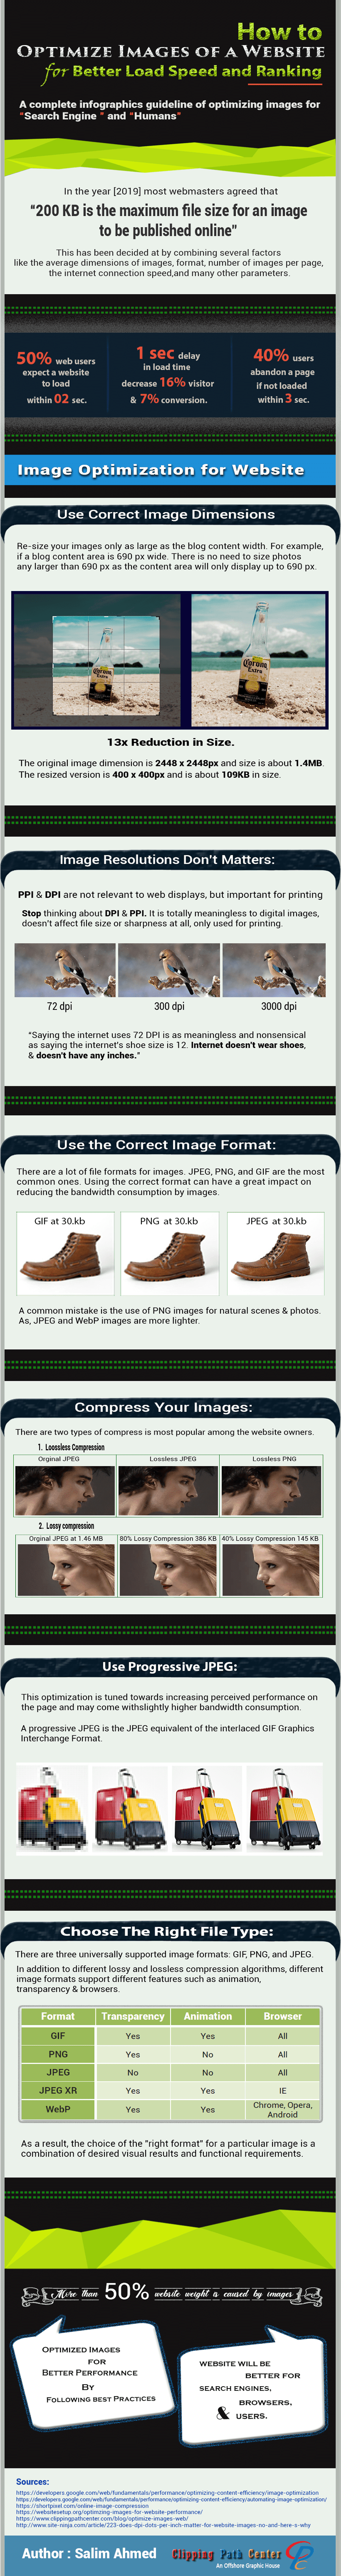 info-graphics Optimize Images of a Website